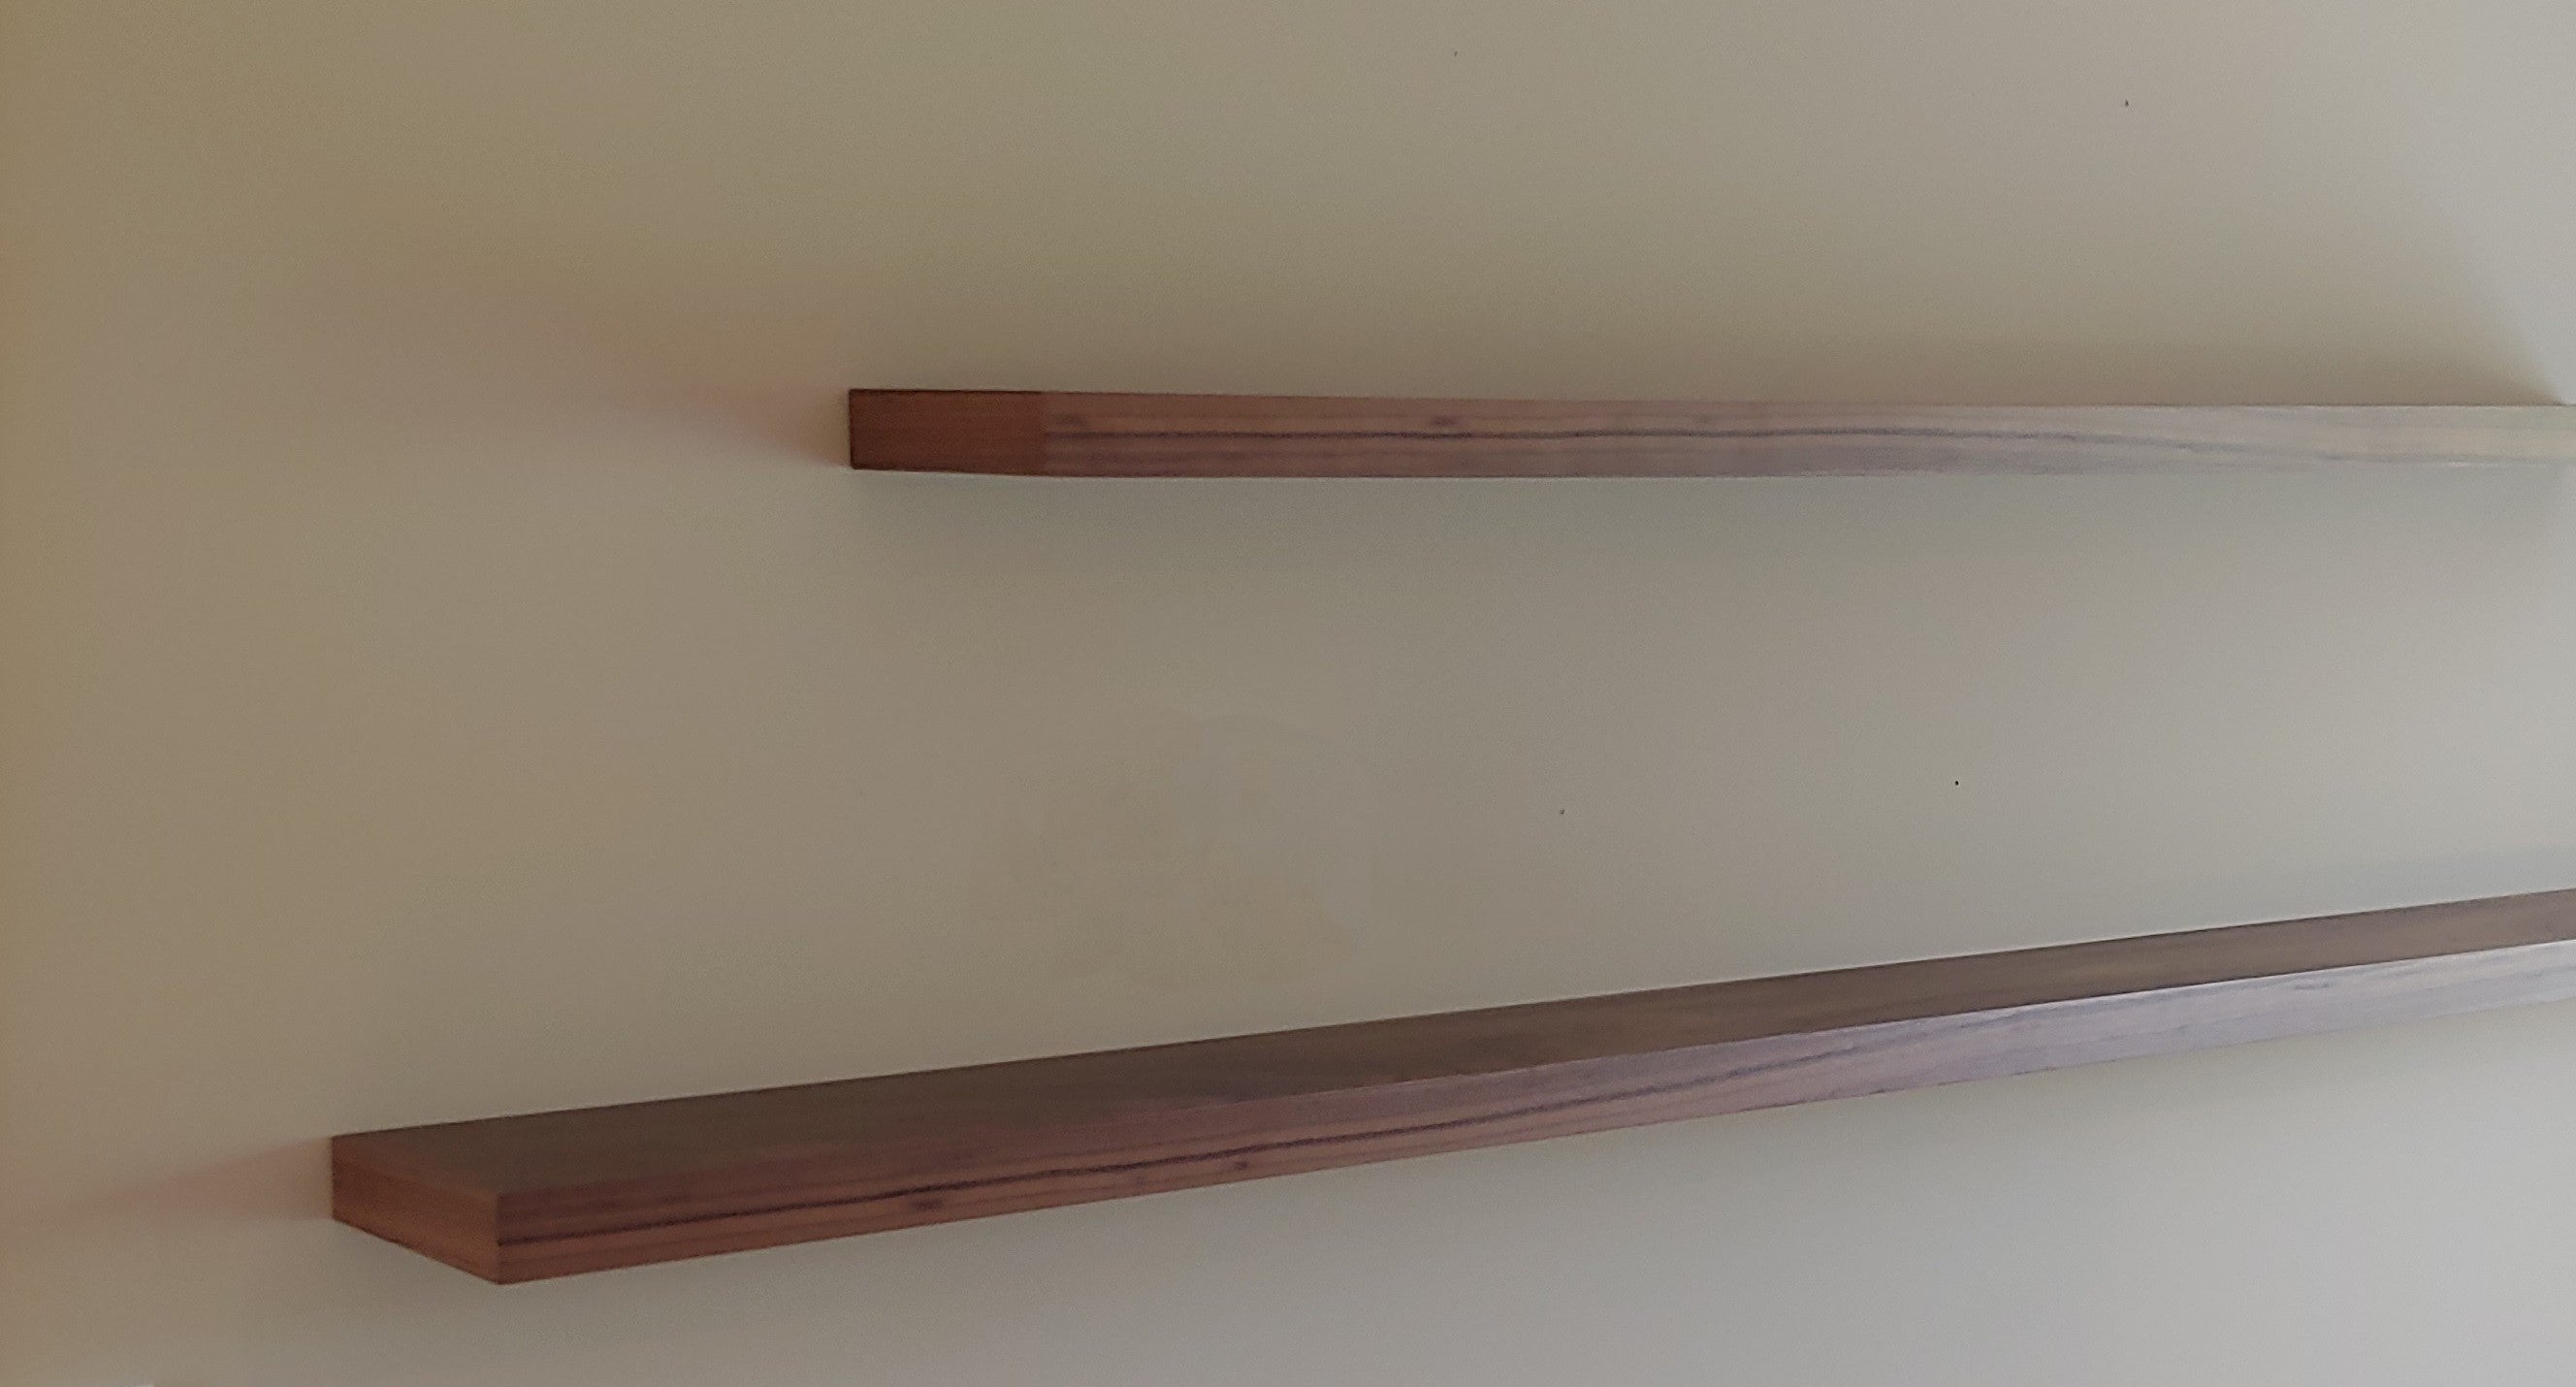 Two six inch floating shelves mounted on a wall